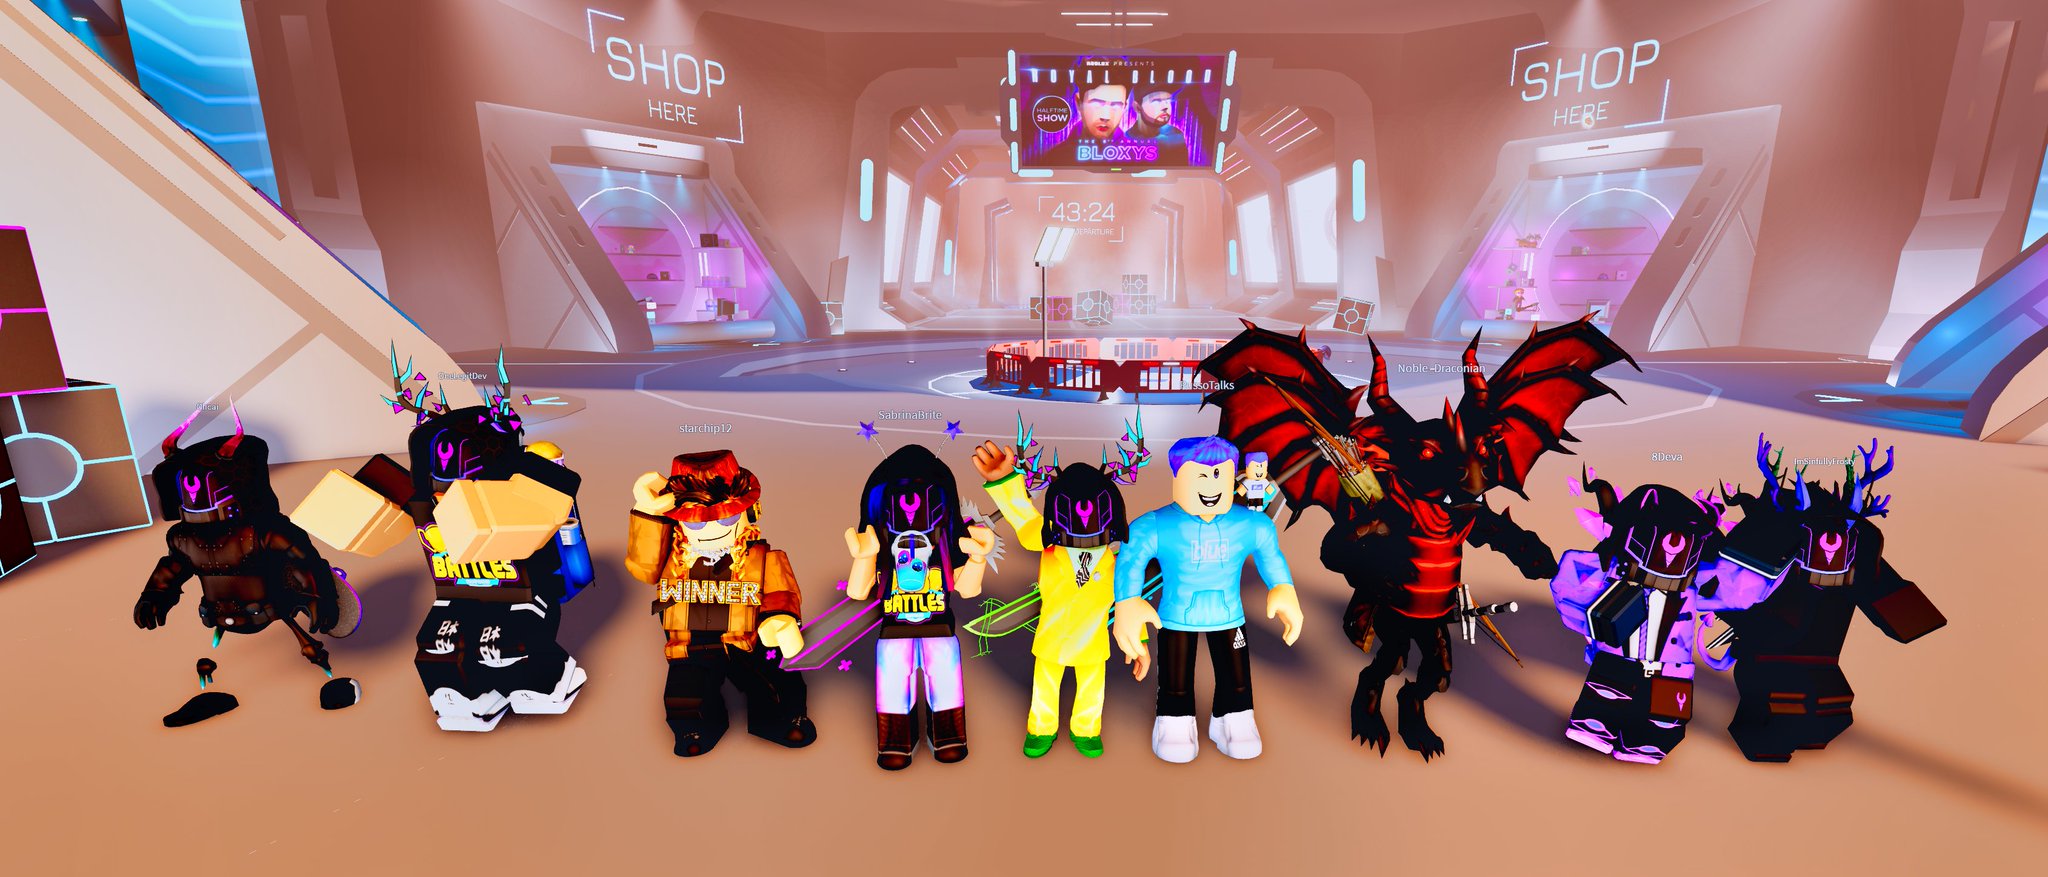 Bloxy News on X: This weeks #BloxyNews Featured Game: Roblox Battle 2018  The classic #Roblox game is back! Put your skills up to the test by  battling your friends or foes in